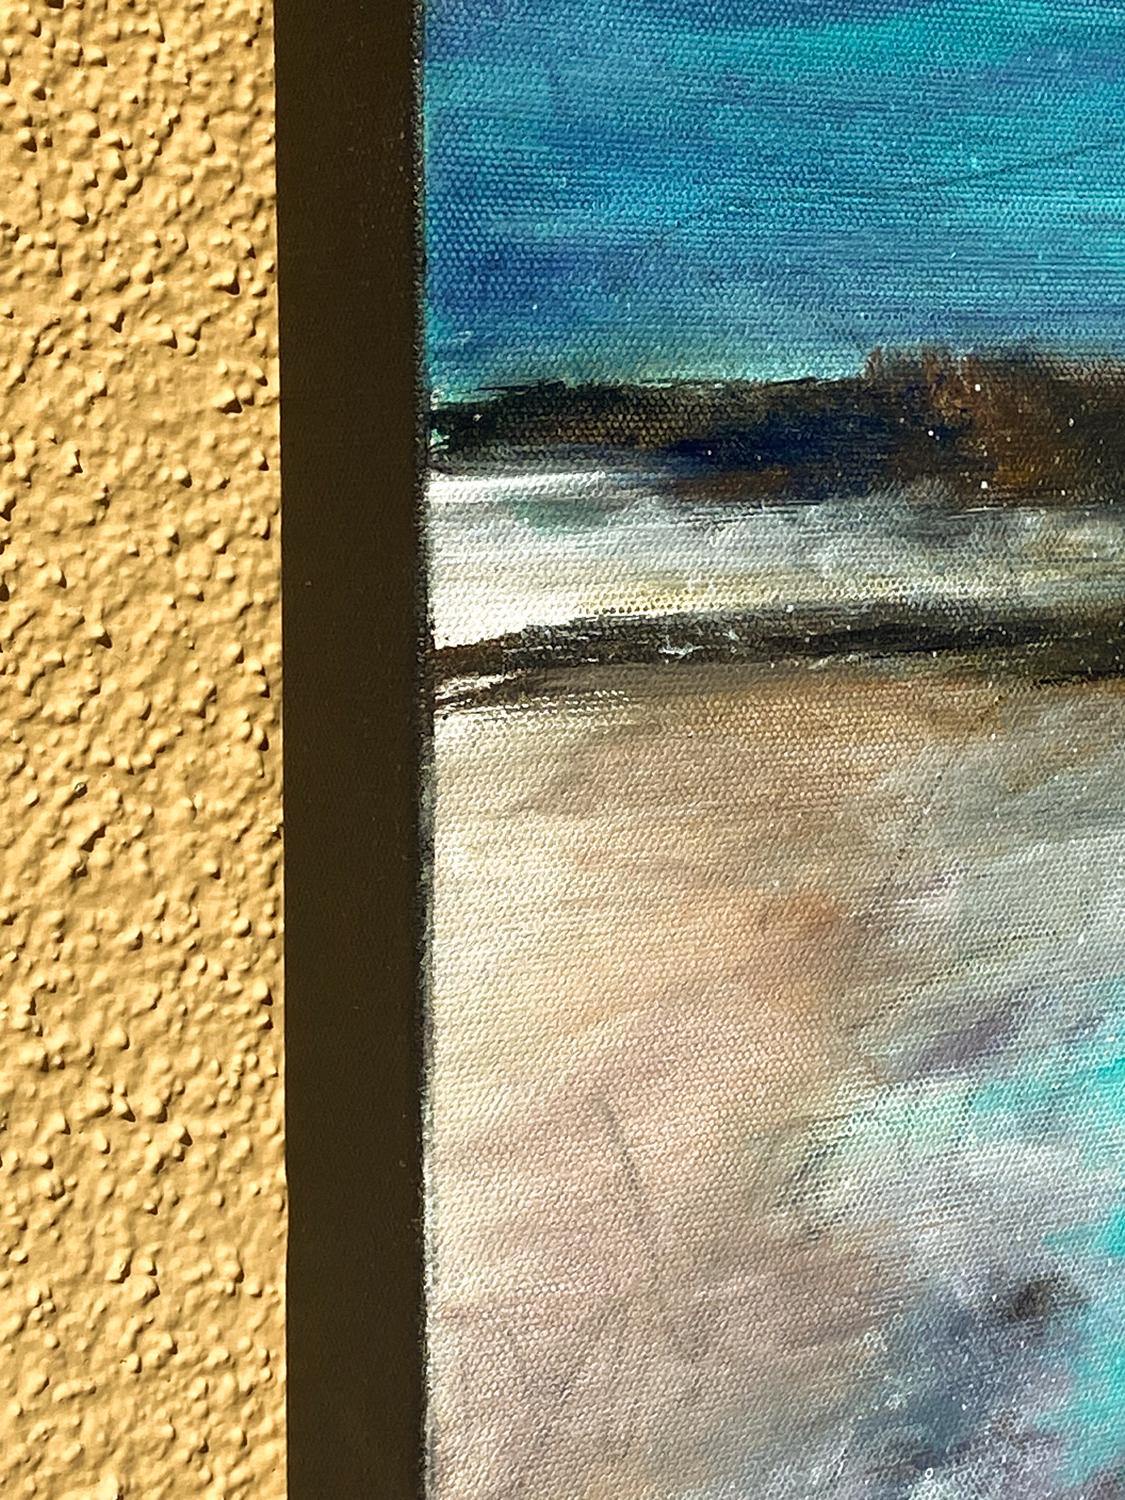 <p>Artist Comments<br>Aquas, purples, and beige evoke the tranquil shore of a Bermuda beach. Loose marks drawn with charcoal define the shadows, while the shimmering white splatters on the water's edge reflect the moonlight. Rock formations come to